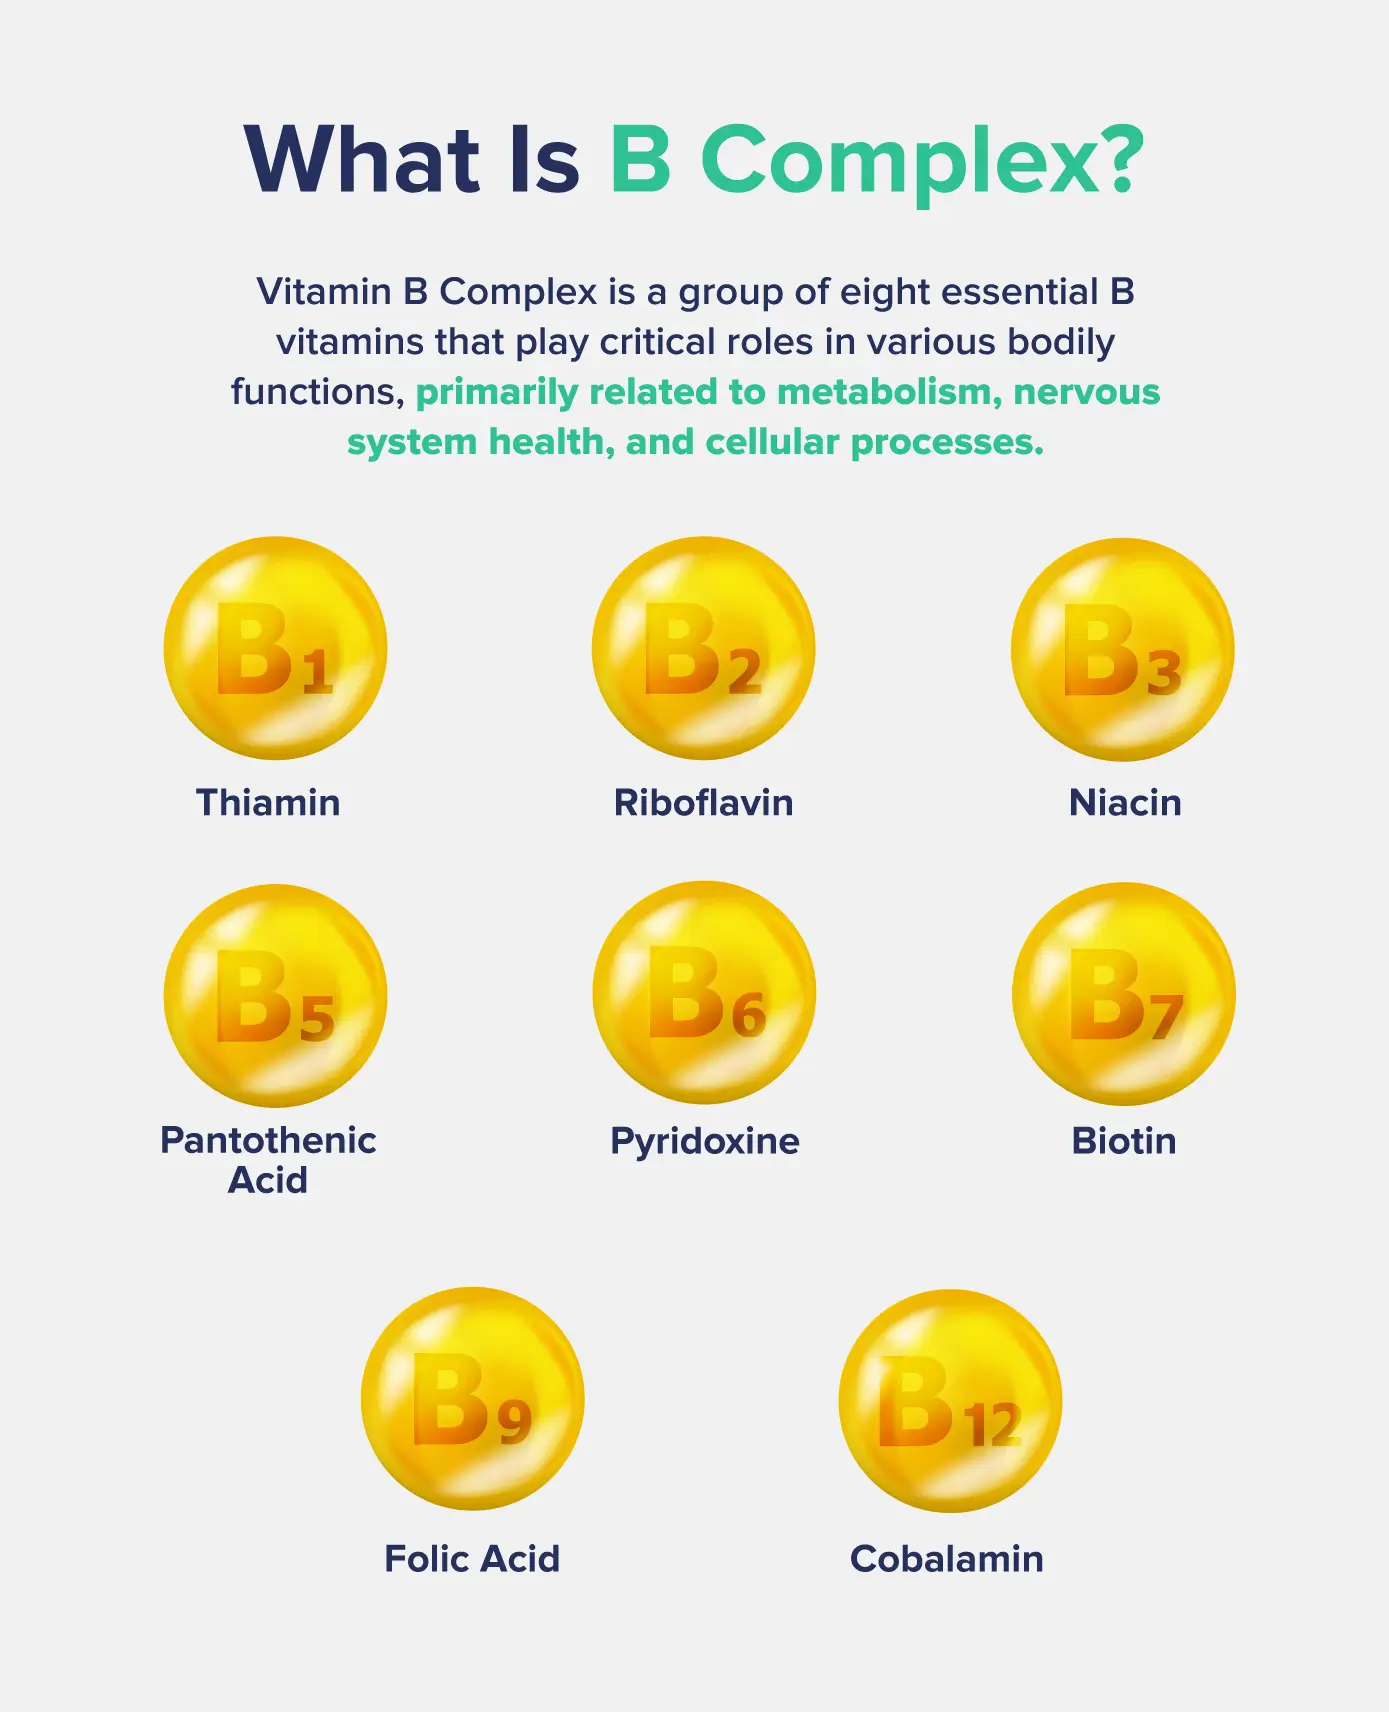  What Is Vitamin B Complex?Vitamin B Complex is a group of eight essential B vitamins that play critical roles in various bodily functions, primarily related to metabolism, nervous system health, and cellular processes.